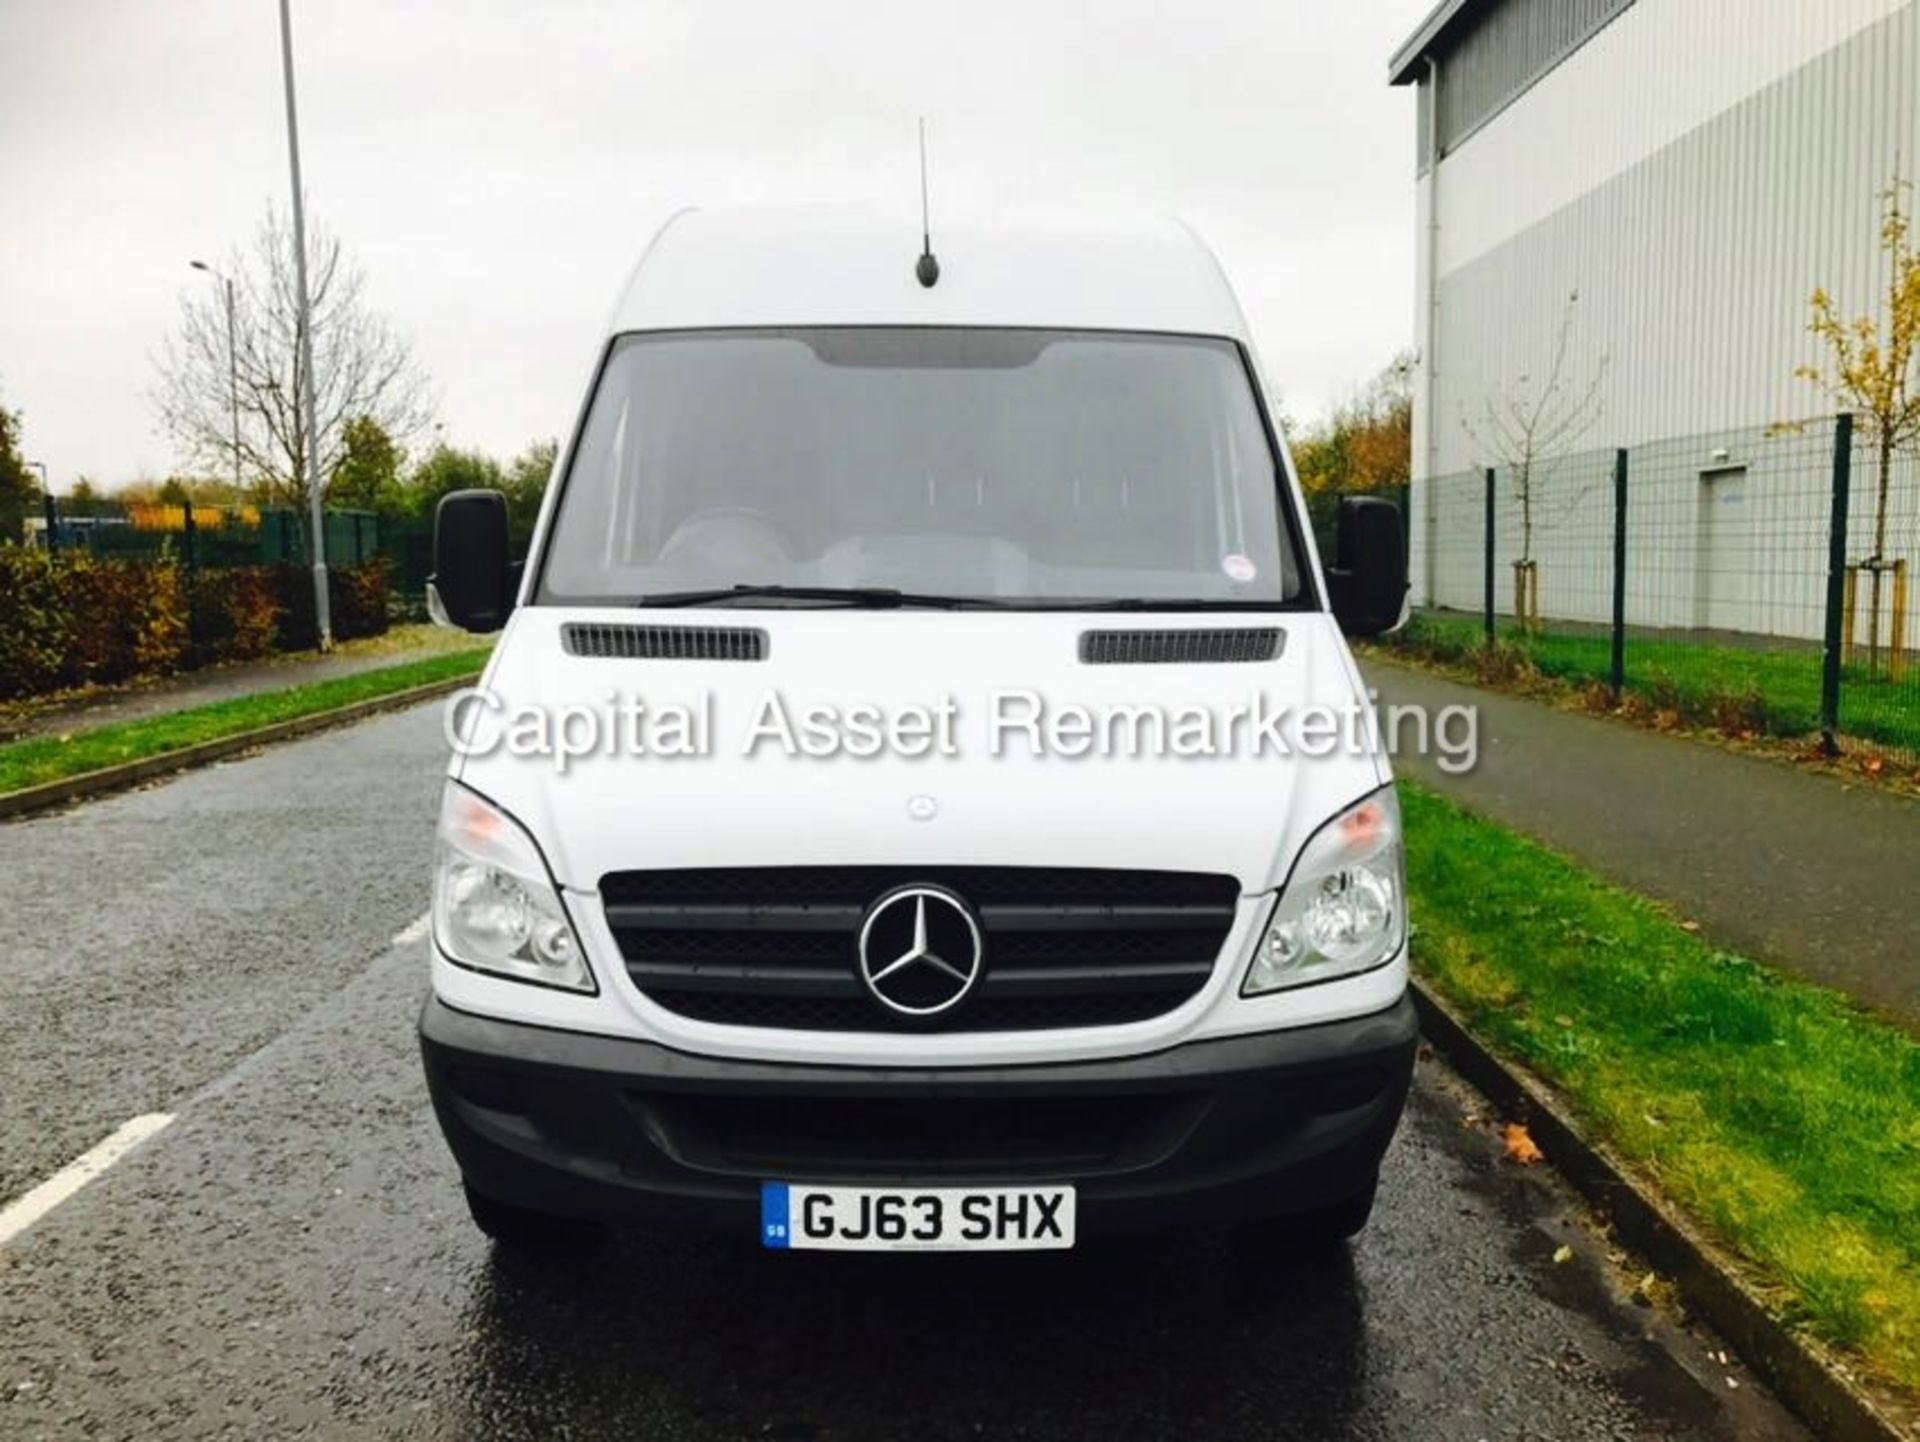 (On Sale) MERCEDES SPRINTER 313CDI - EXTRA LONG WHEEL BASE 4.7 MTR - 2014 MODEL - 1 OWNER -LOW MILES - Image 3 of 15